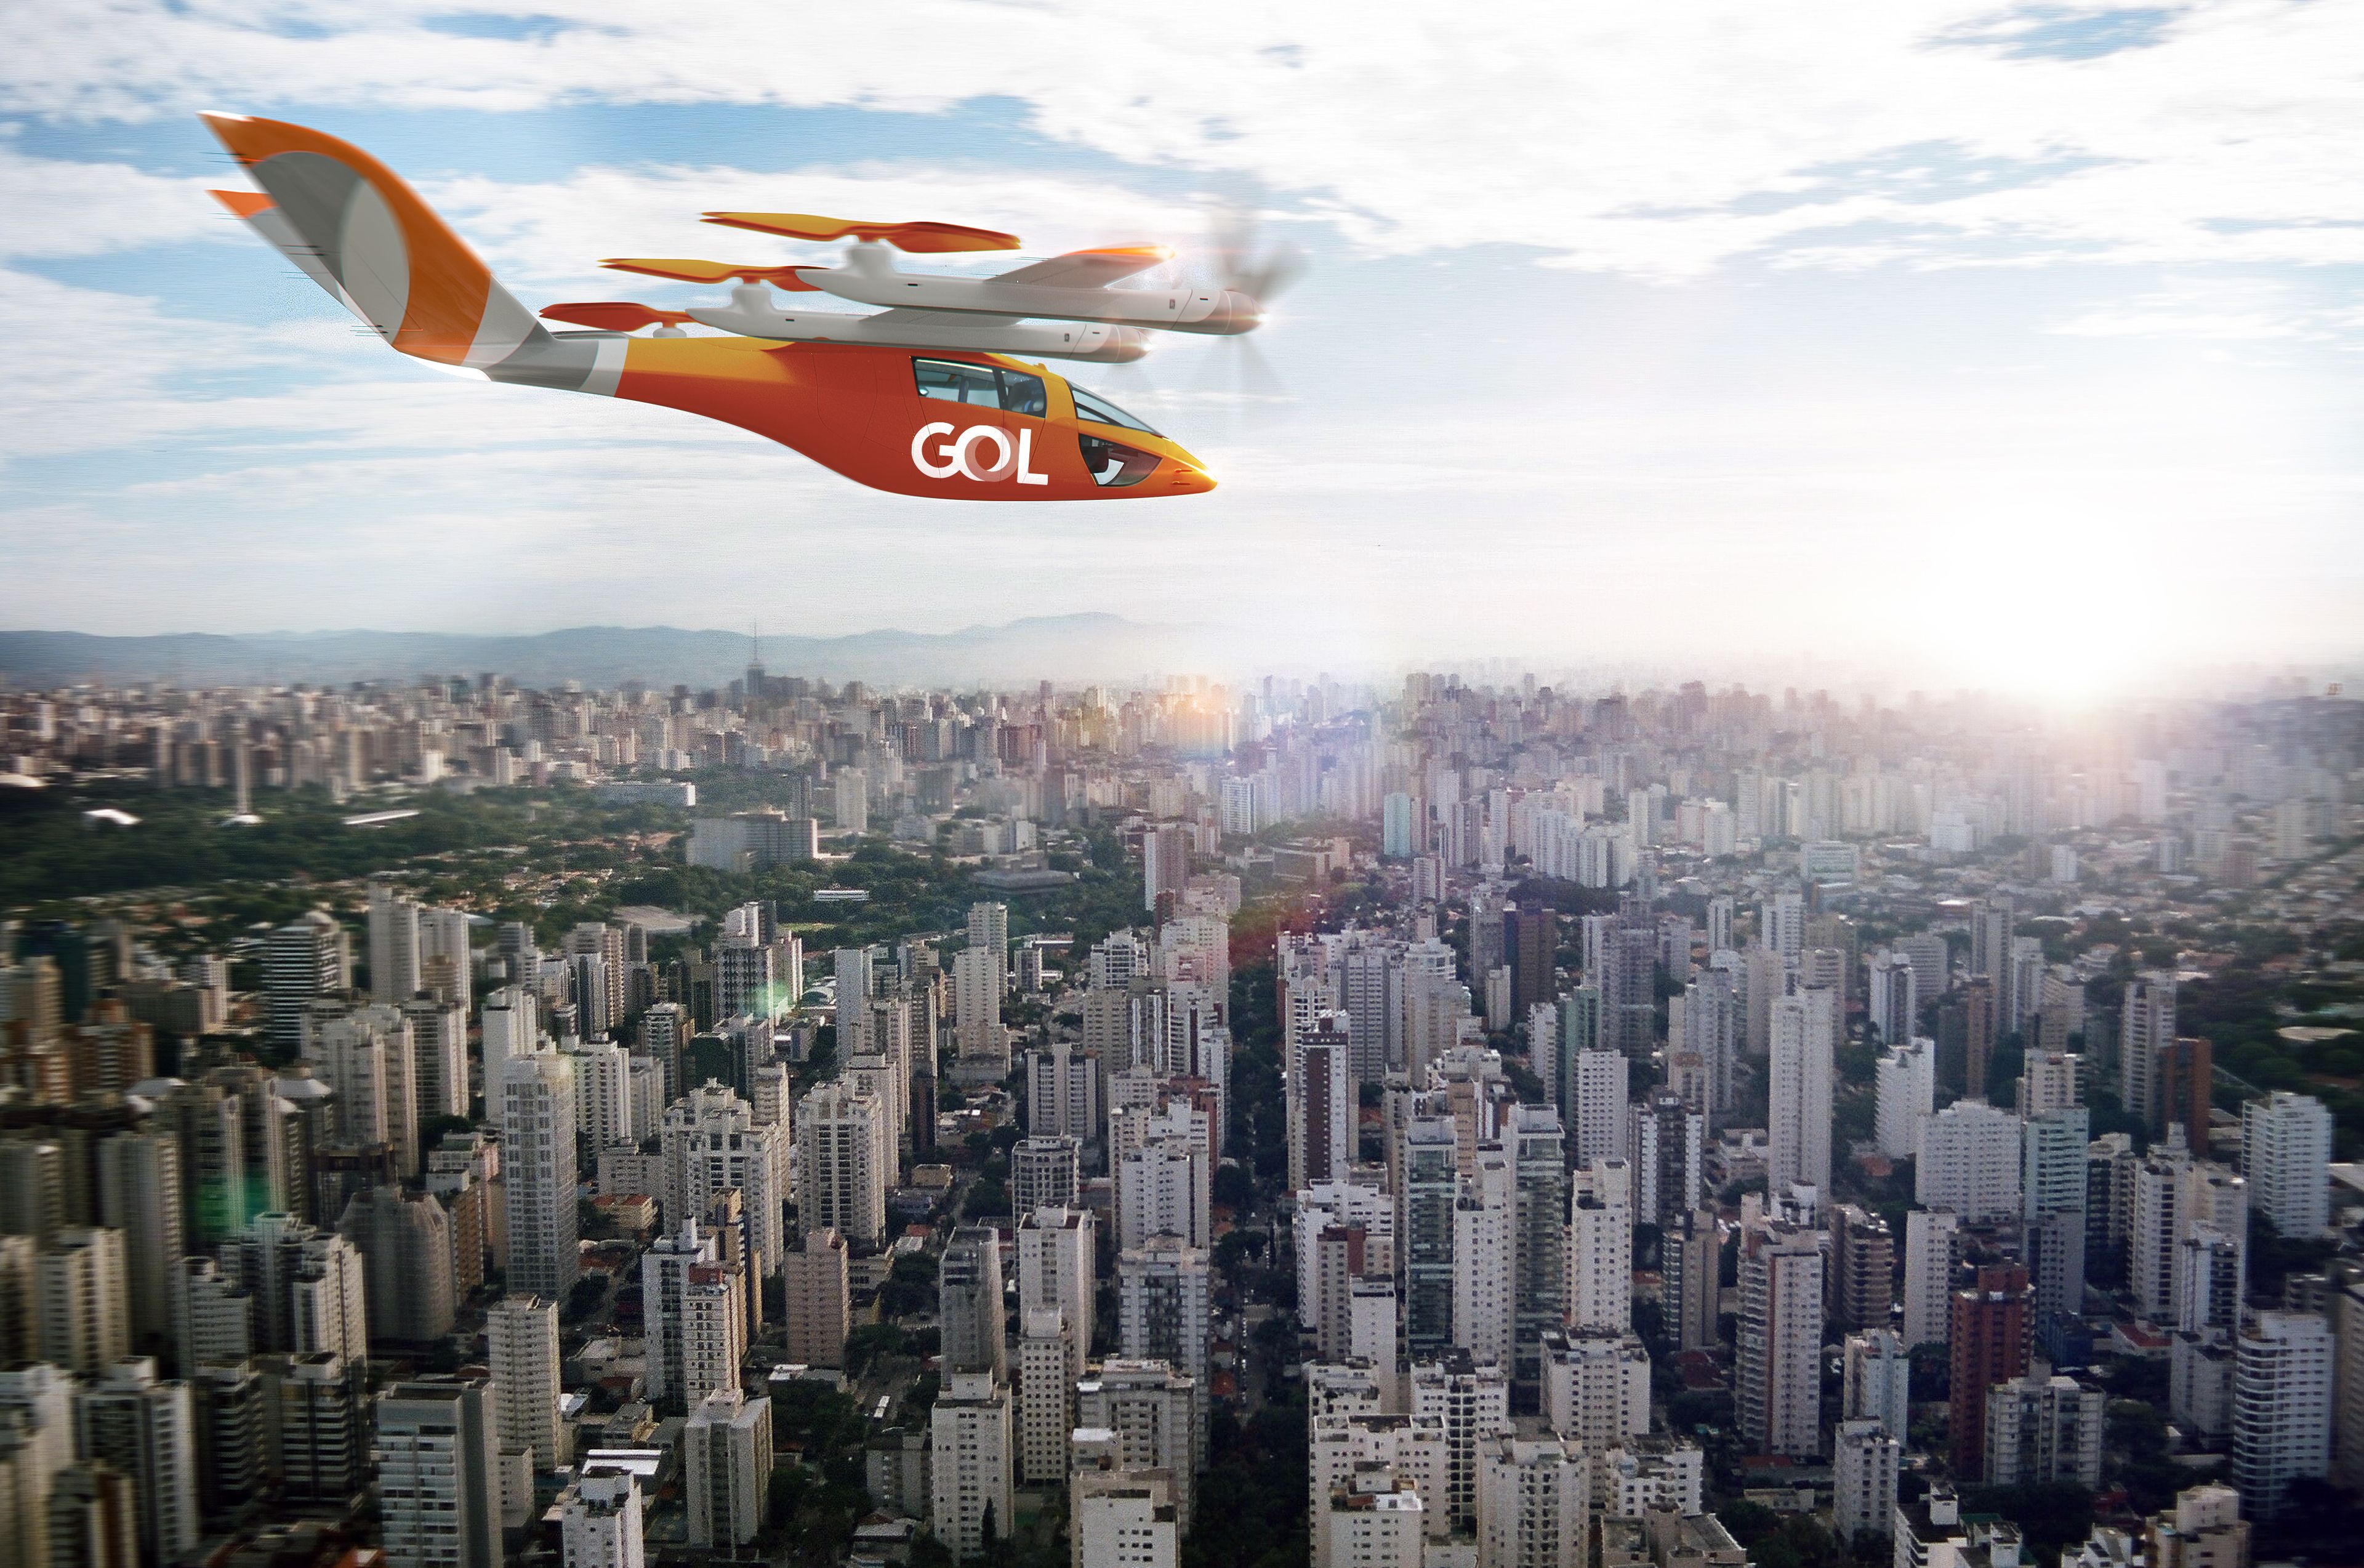 An eVTOL with GOL's livery